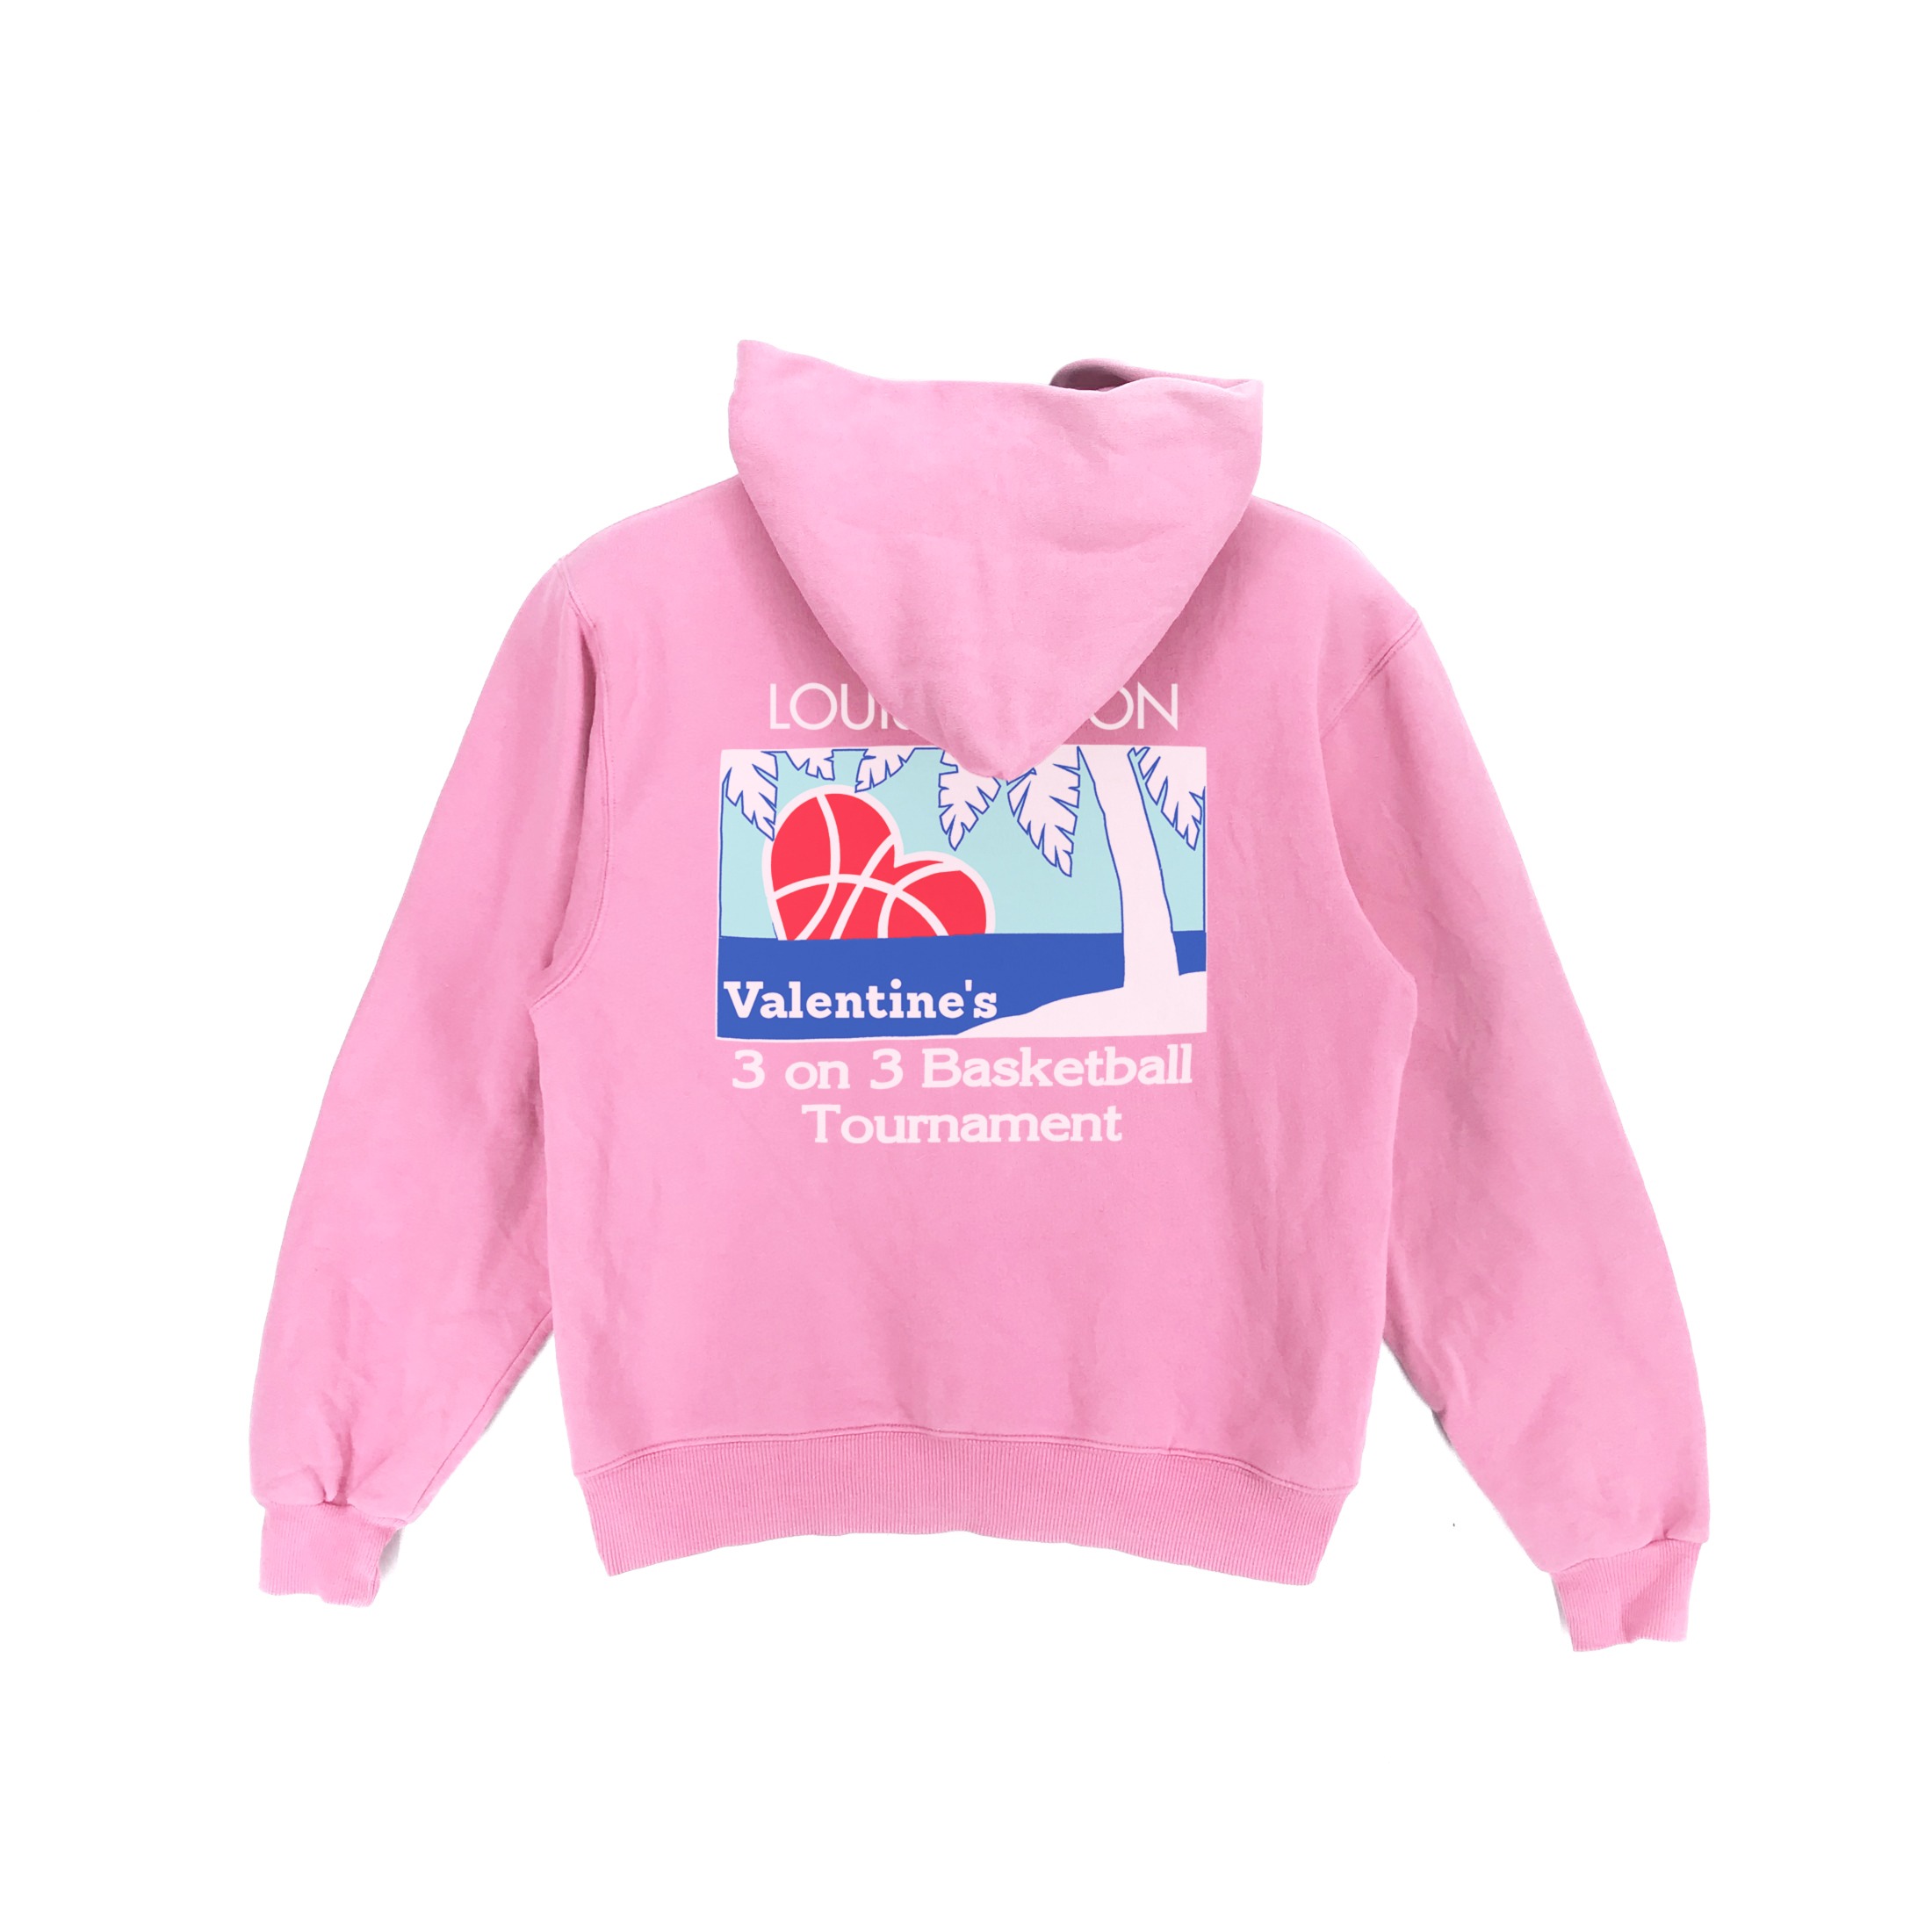 Louis vuitton underage 3 on 3 basketball tournament valentines day edition pullover hoodie product pink back